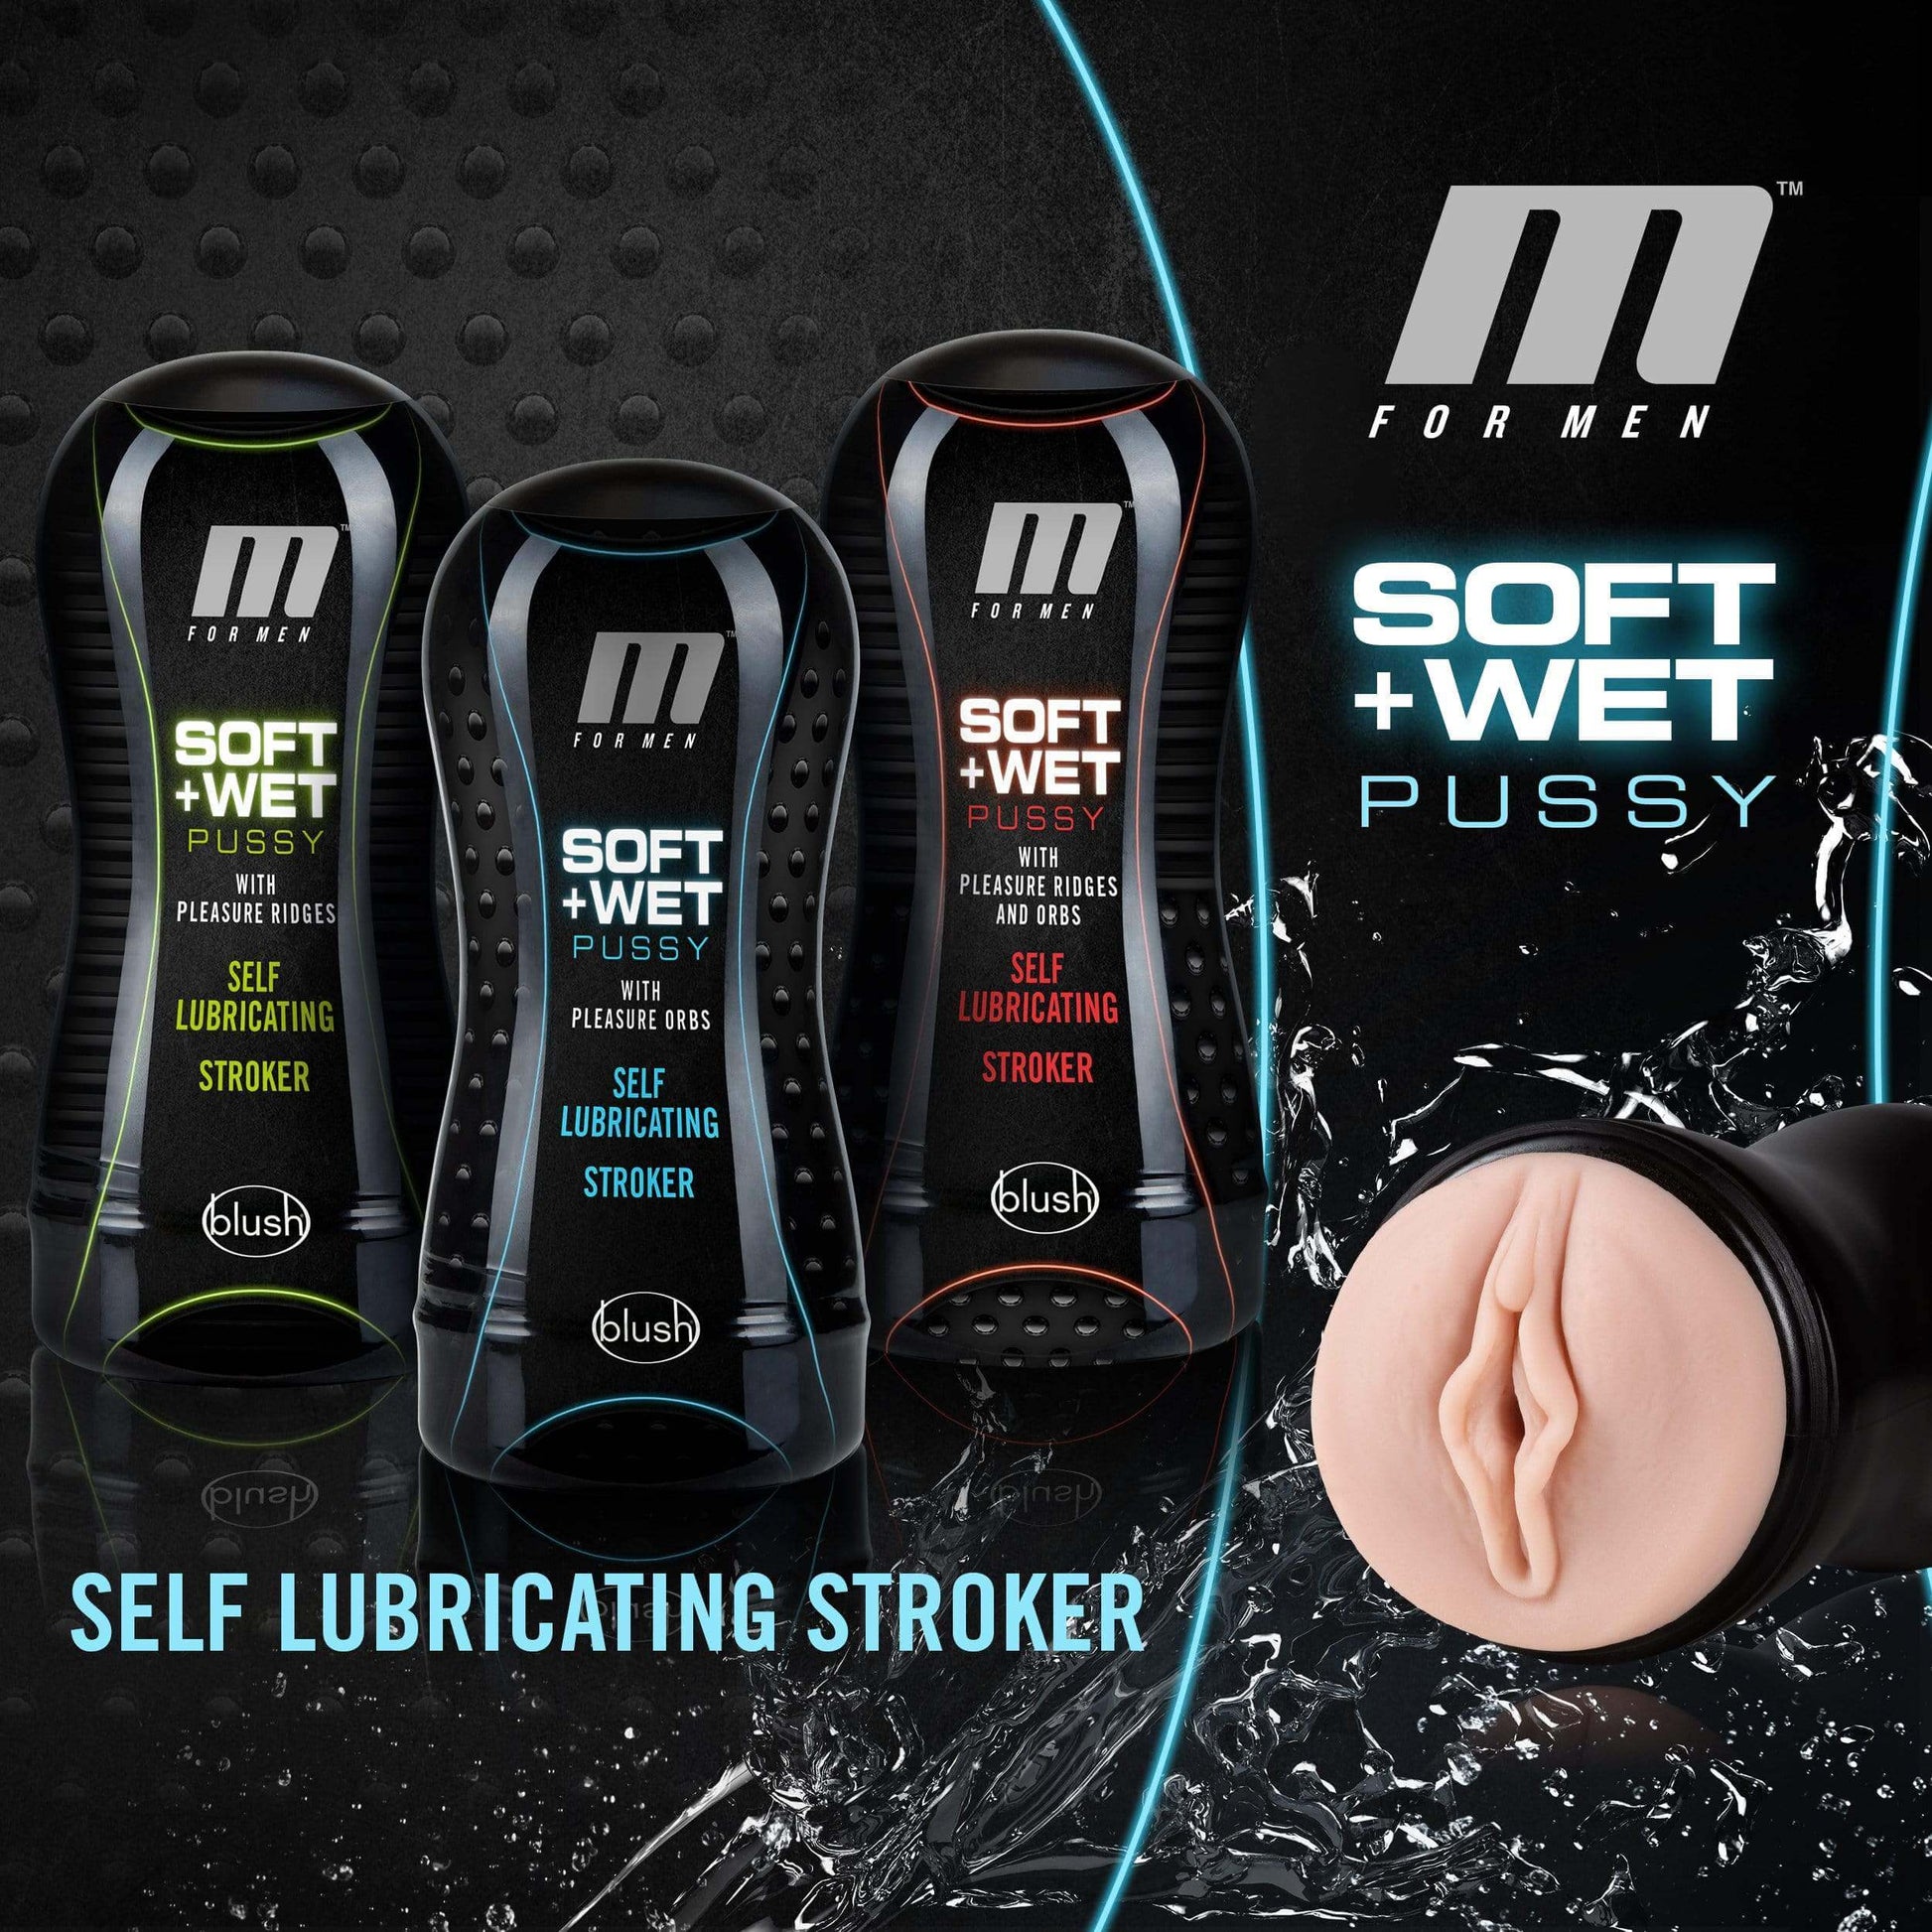 M for Men - Soft and Wet - Pussy with Pleasure Ridges - Self Lubricating Stroker Cup - Vanilla - Thorn & Feather